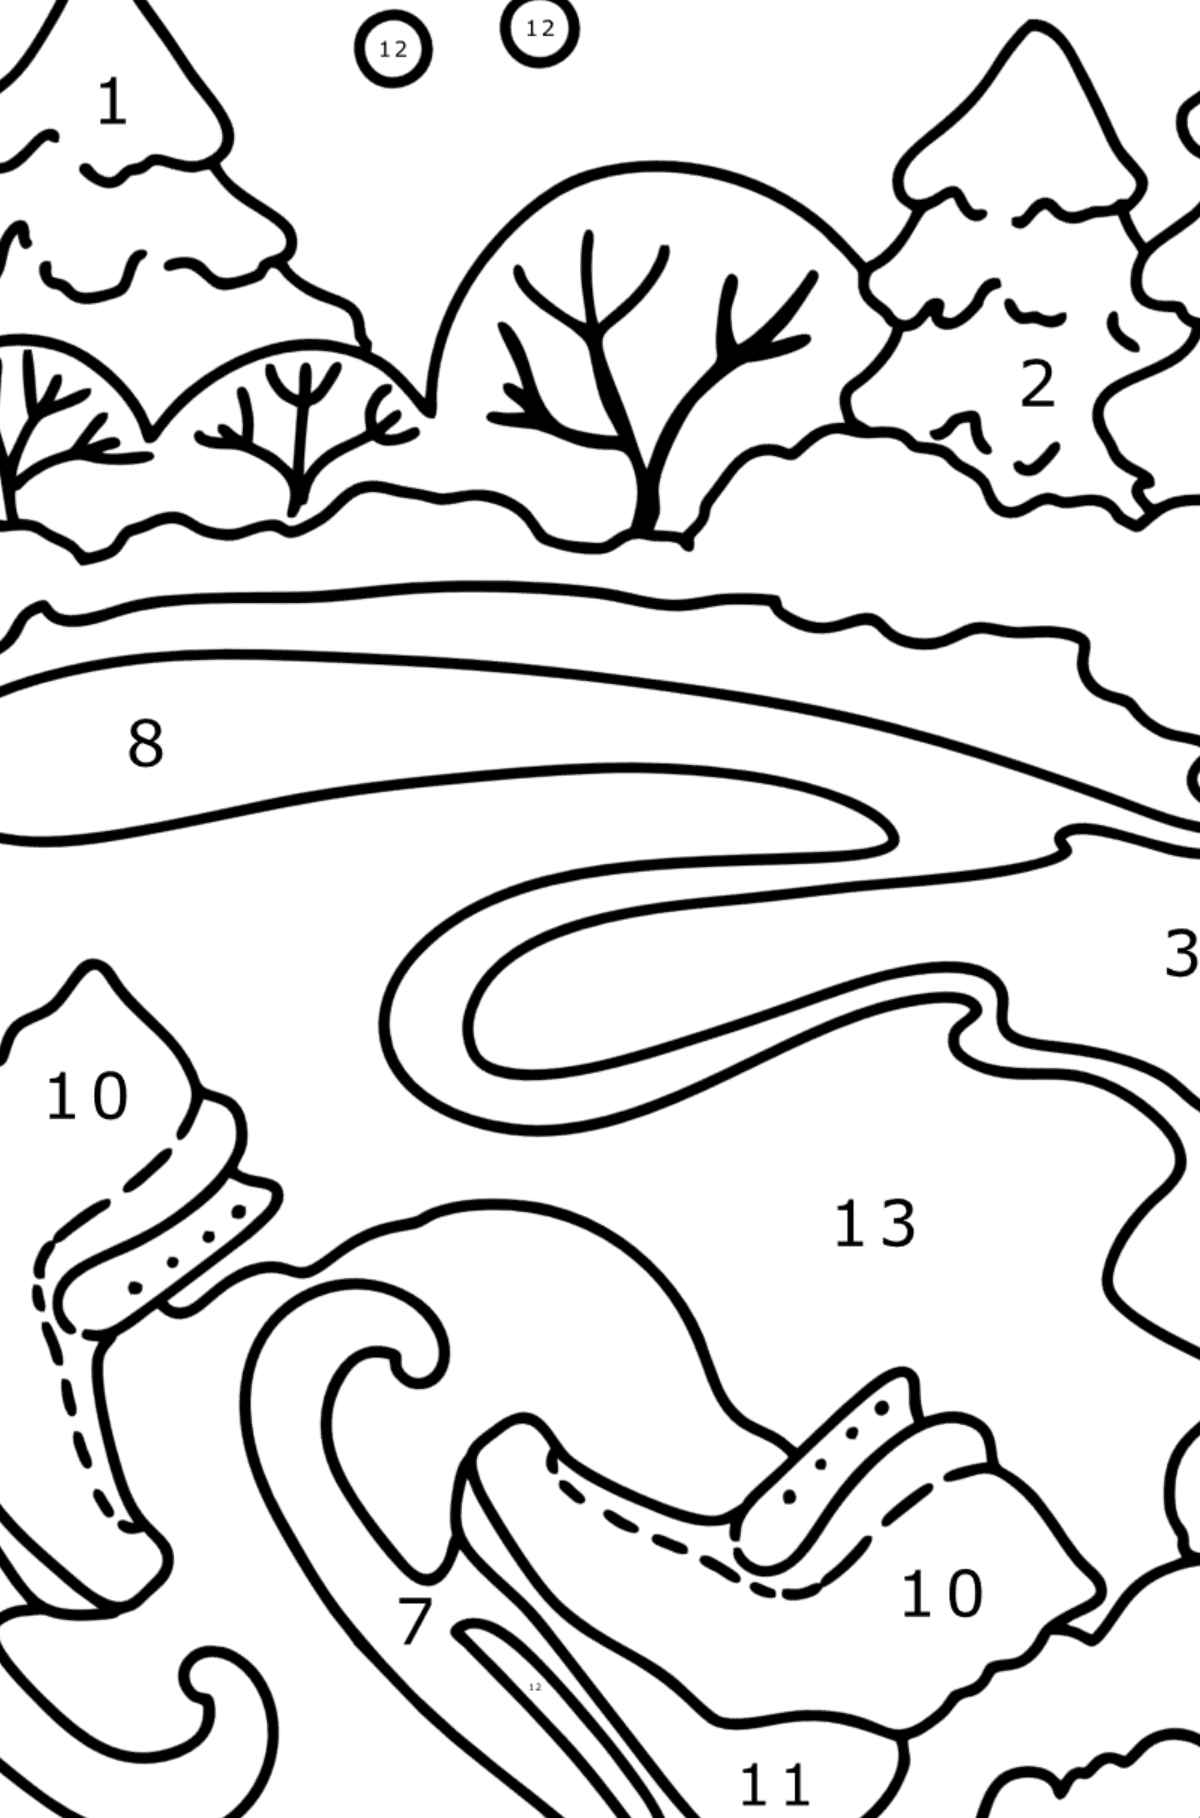 Coloring page - Winter and skates - Coloring by Numbers for Kids